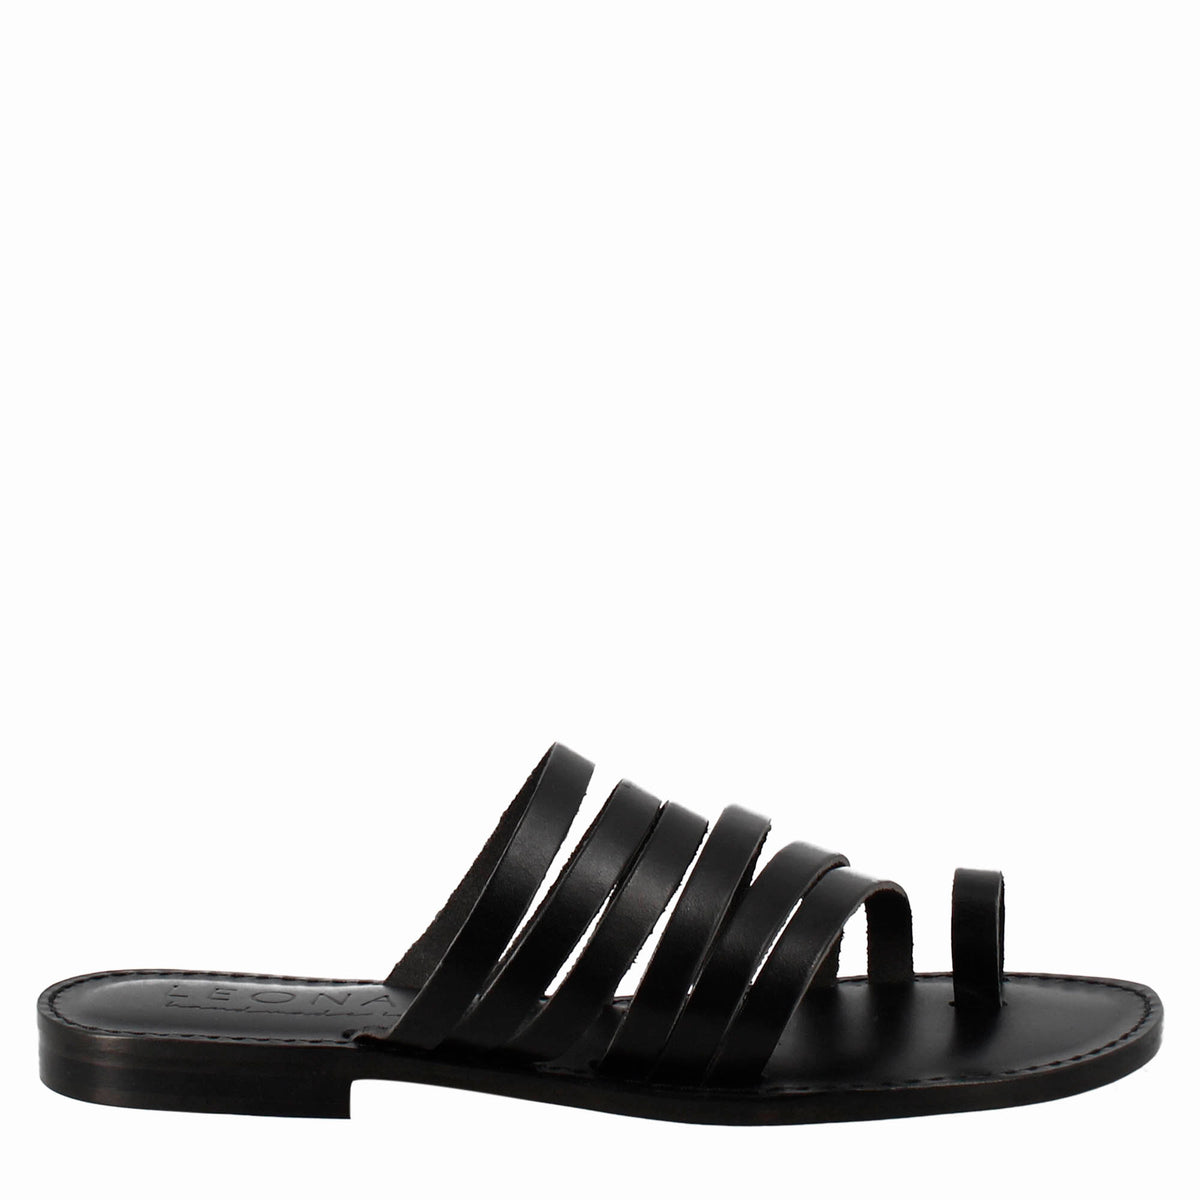 Celestia women's sandals in ancient Roman style in black leather 